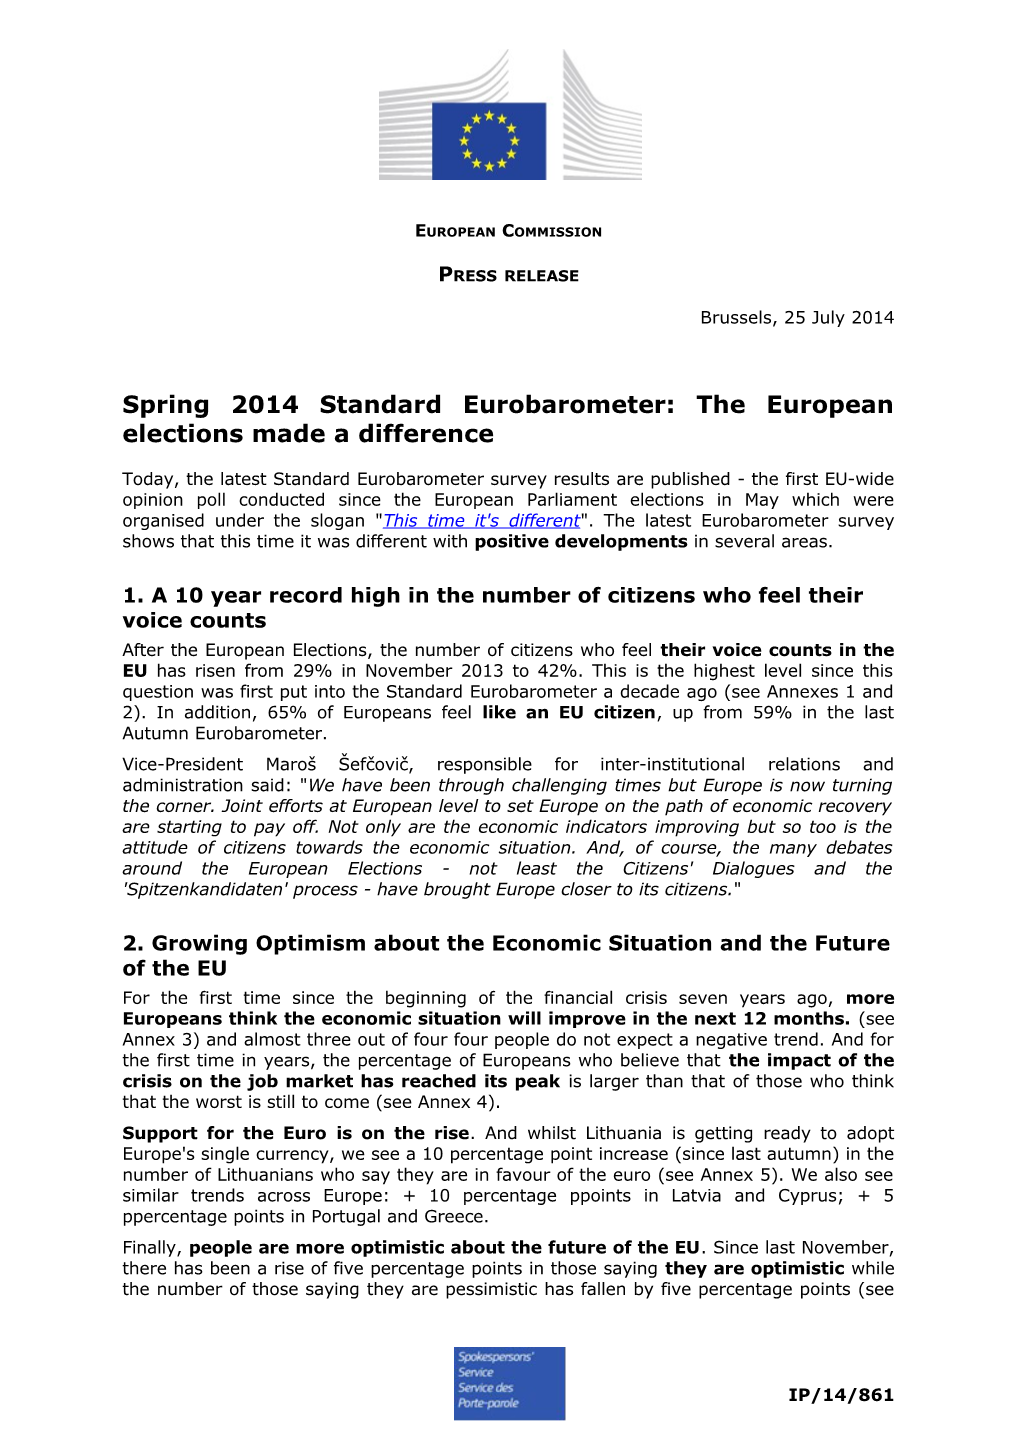 Spring 2014 Standard Eurobarometer: the European Elections Made a Difference